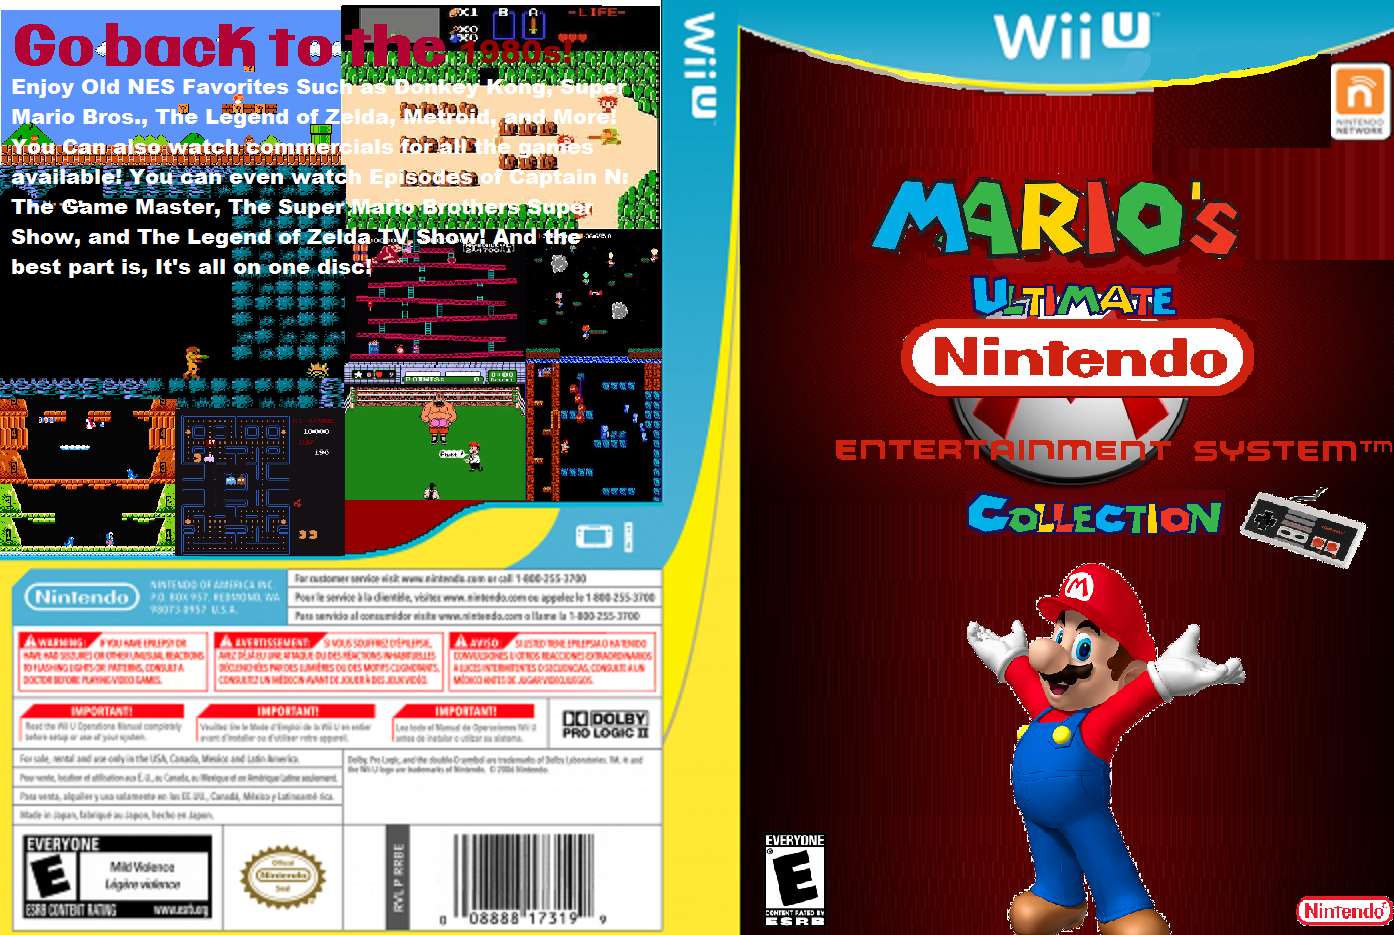 Mario's Ultimate NES Collection box cover